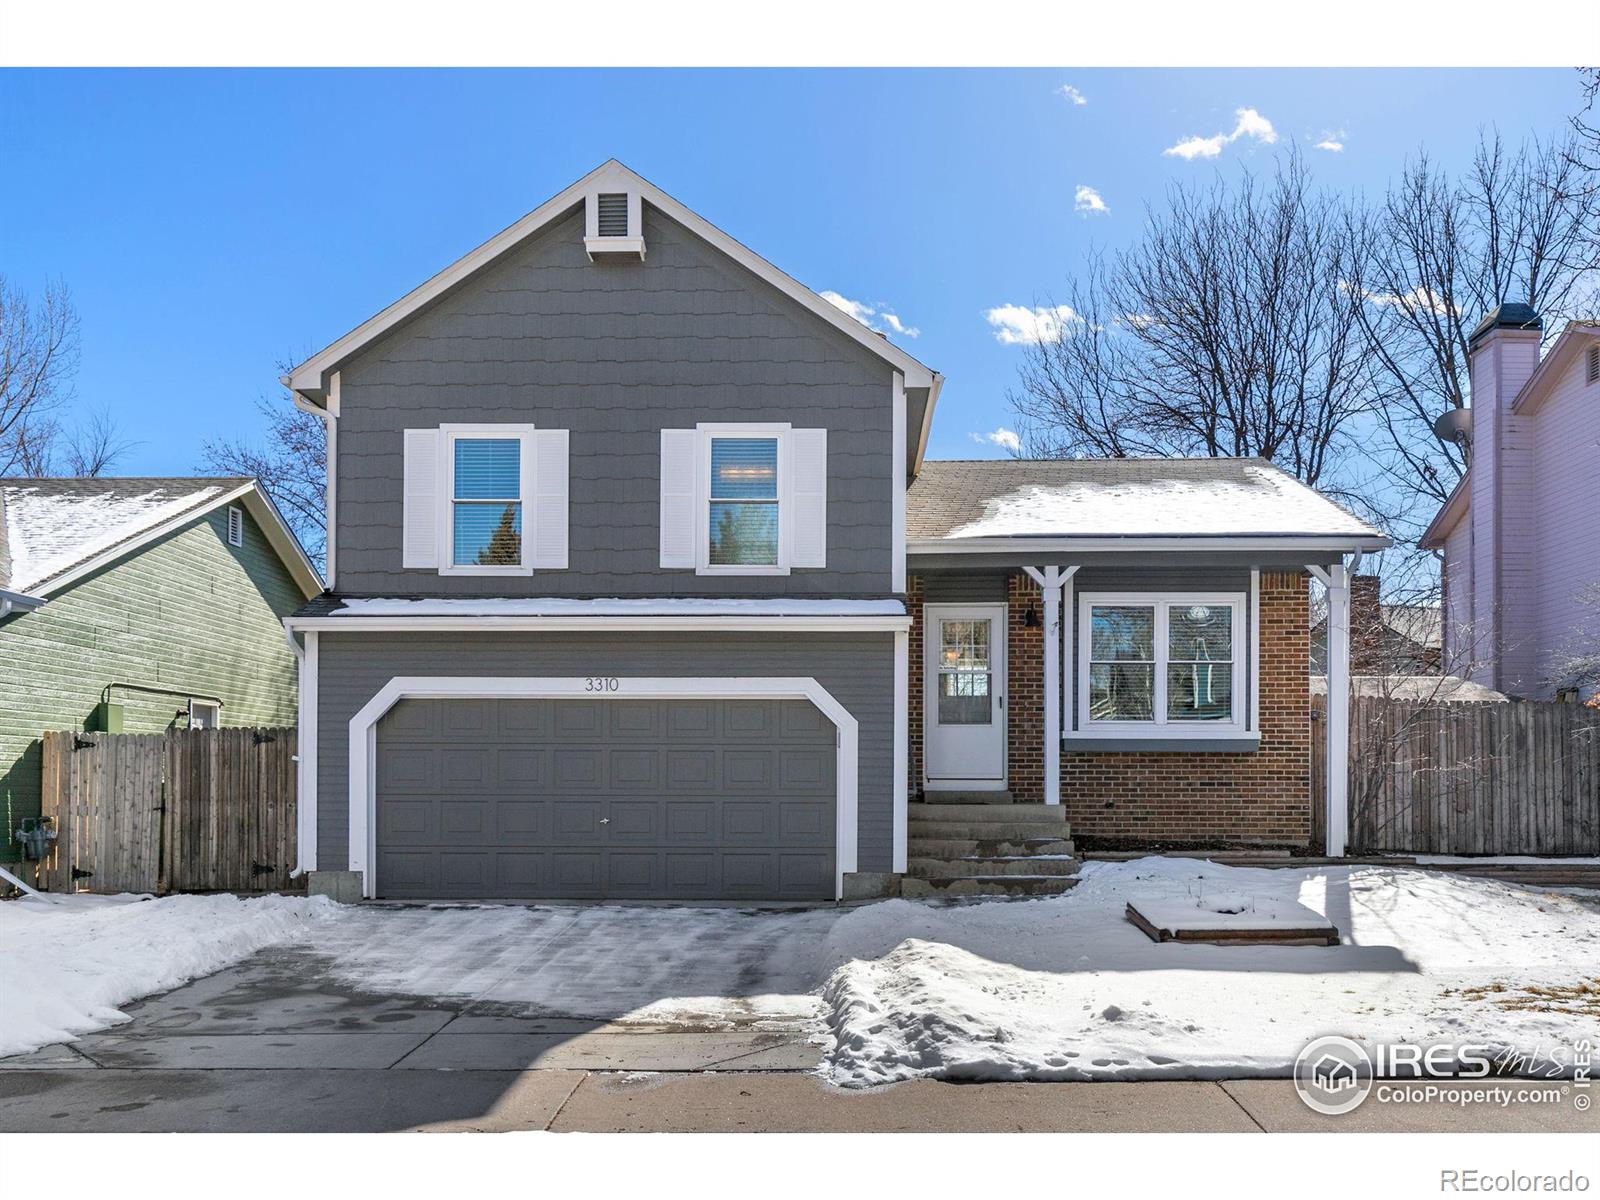 3310 w 127th avenue, Broomfield sold home. Closed on 2024-03-18 for $535,000.